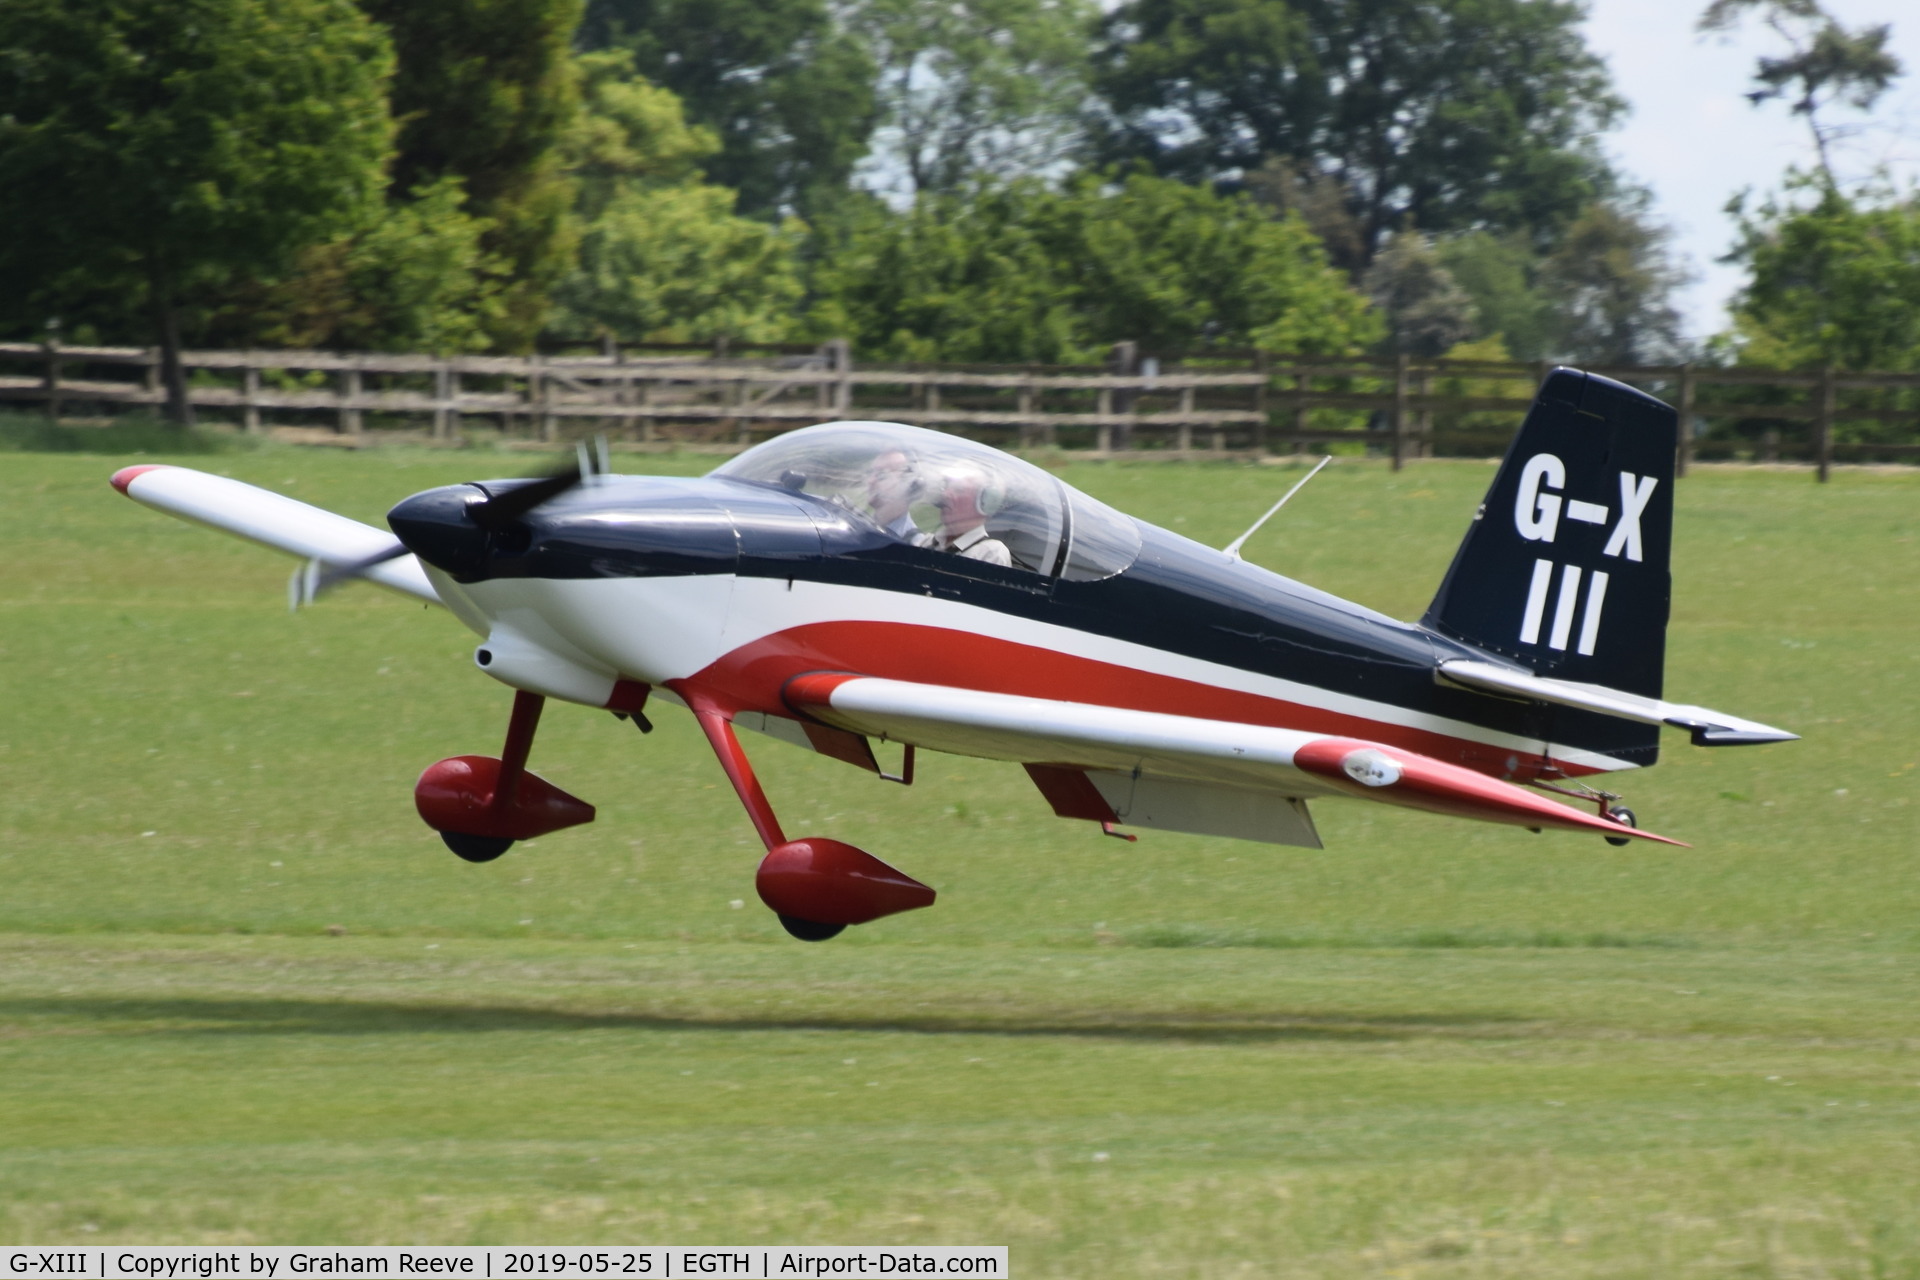 G-XIII, 2005 Vans RV-7 C/N PFA 323-14165, Departing from Old Warden.